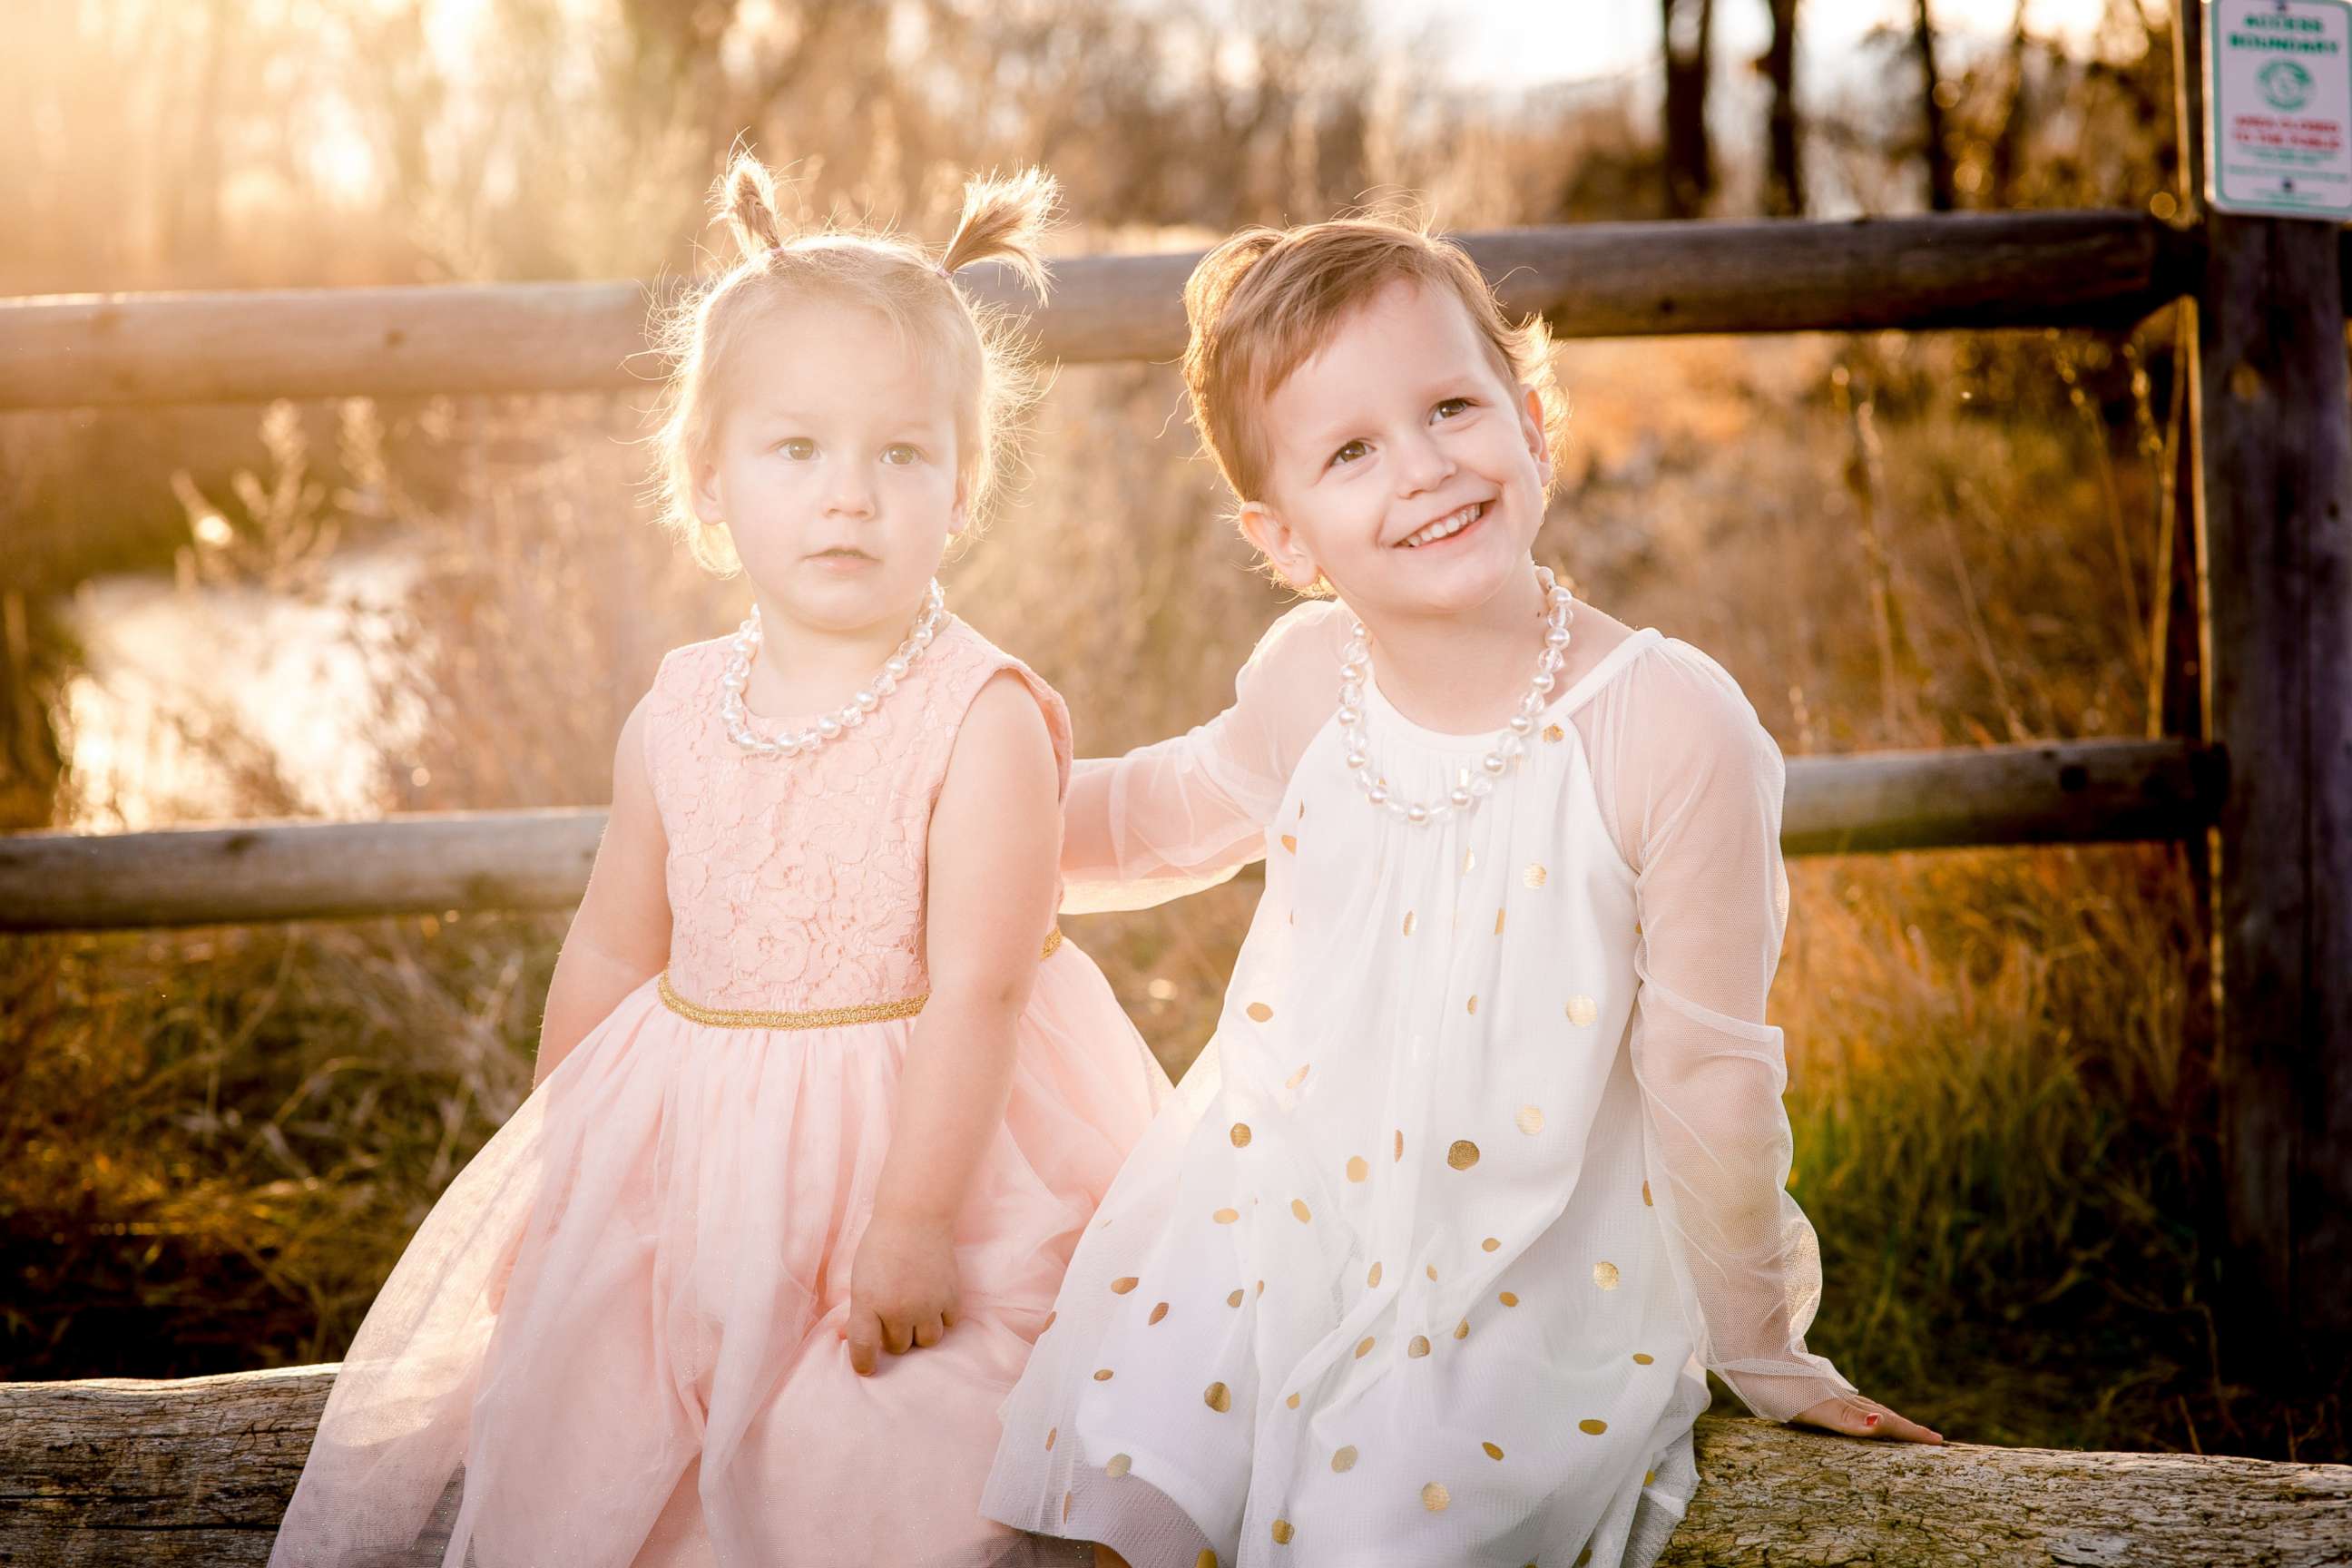 PHOTO: Sisters Celeste, 3 and Bella, 4, were murdered at the hands of their father Chris Watts.